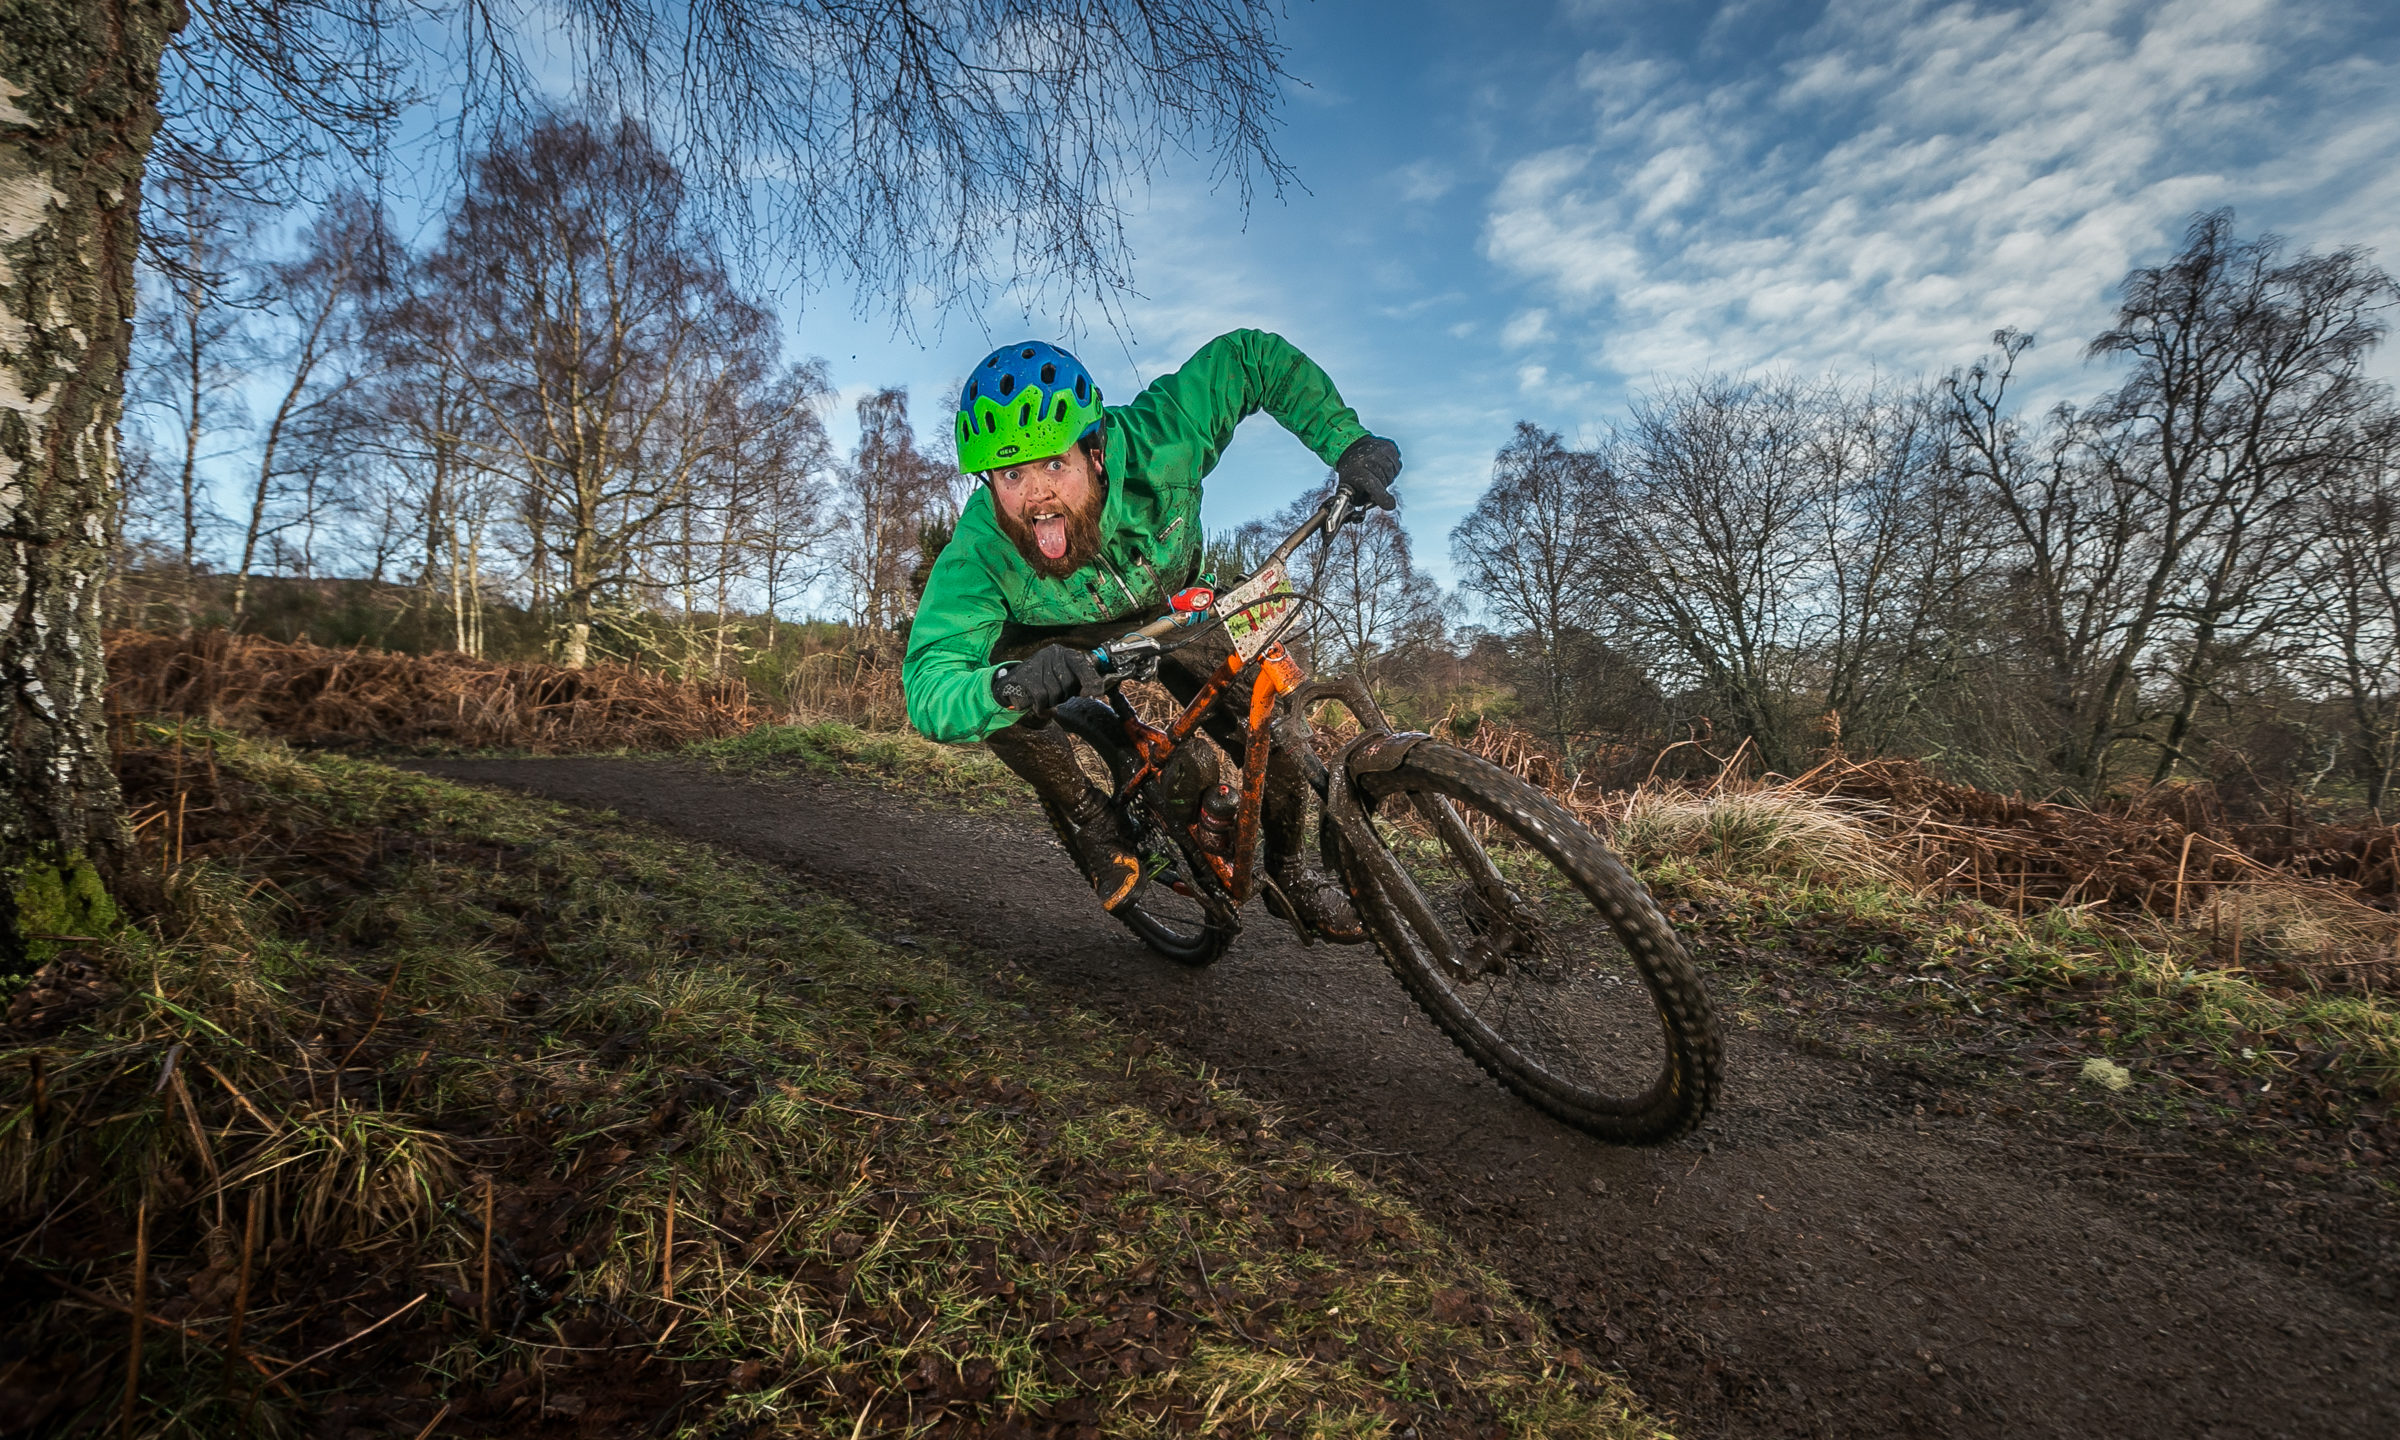 Over 1000 riders battled it out over the weekend in wet and muddy conditions